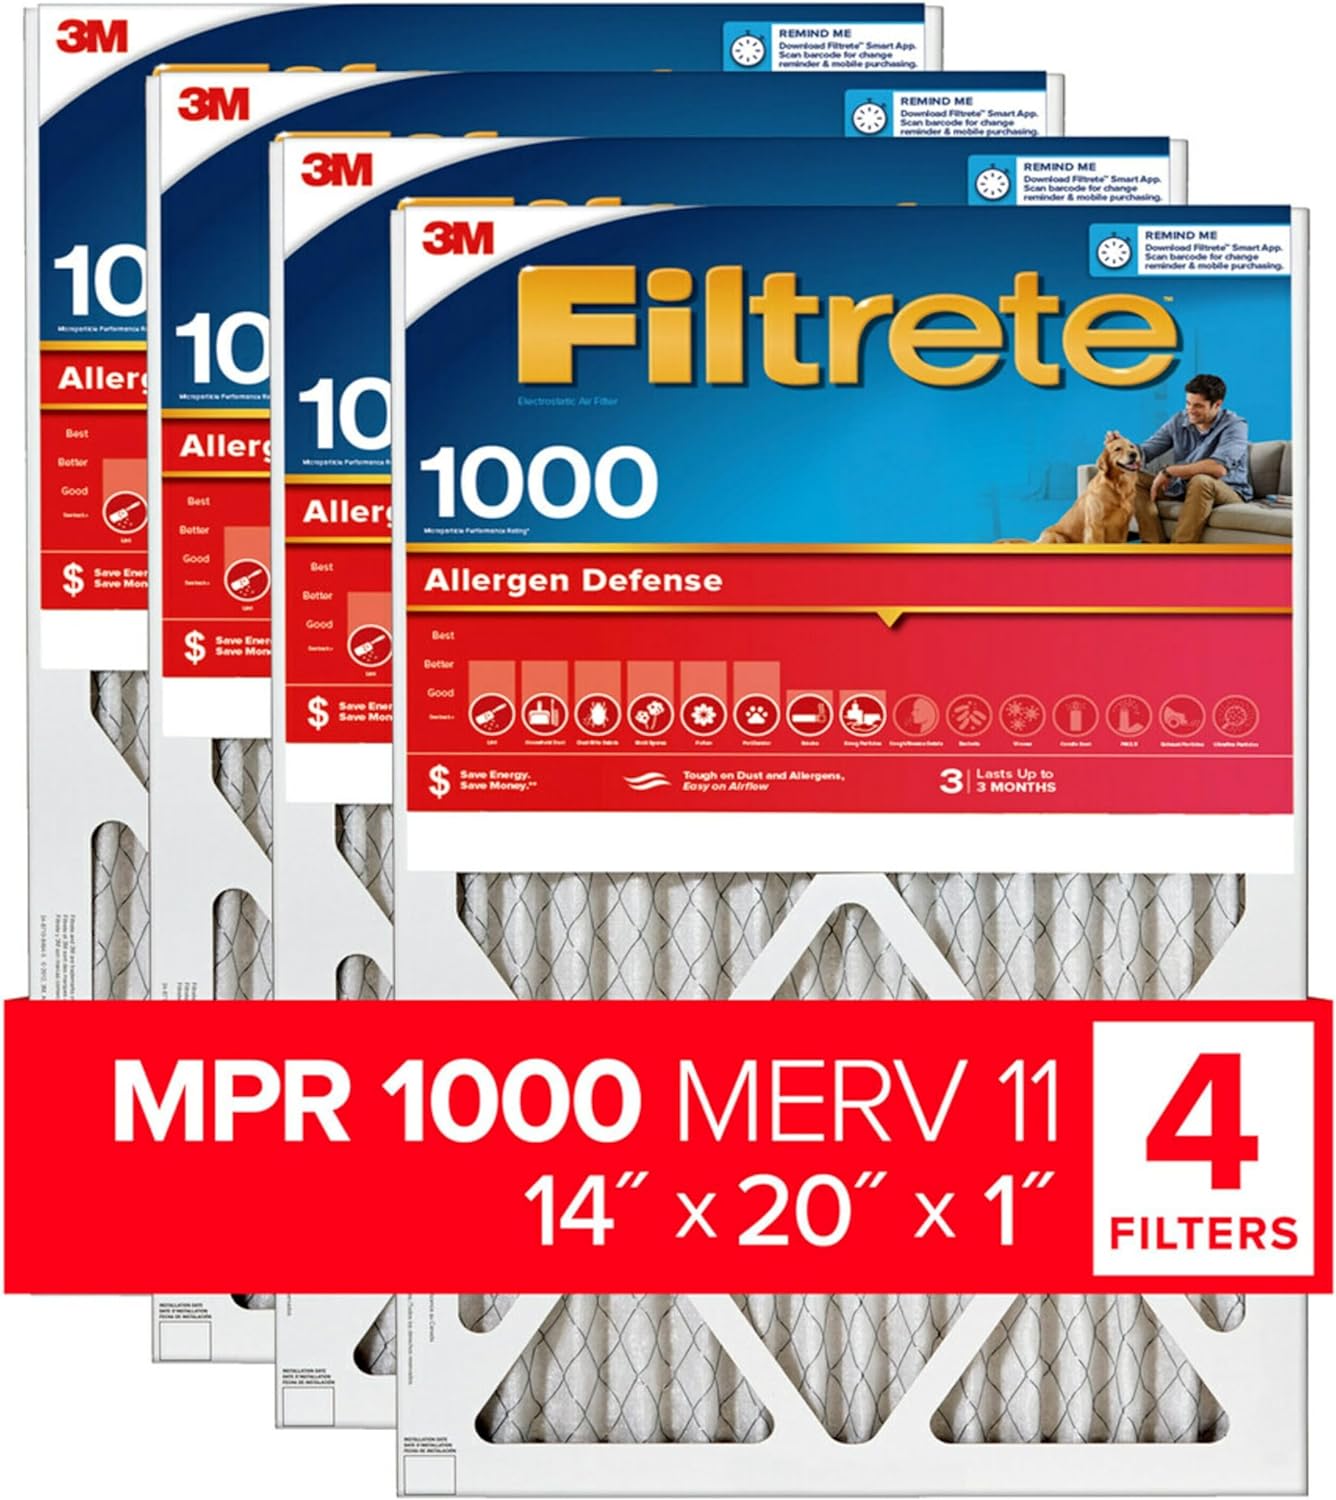 Purchased these cause my HVAC guy told me to get a lower MERV rating. I was using MERV 13 filters. He suggested MERV 8 so that it doesn't over burden my unit. But I opted for these cause I looked at the graphics on what it would filter out the most. So far, these work well. I change filters every 3 months and haven't had an issue with the first one yet. Air flow seems good. My system runs smoothly. Air quality in my townhouse is good. Although I do have a couple air purifiers going as well.Price